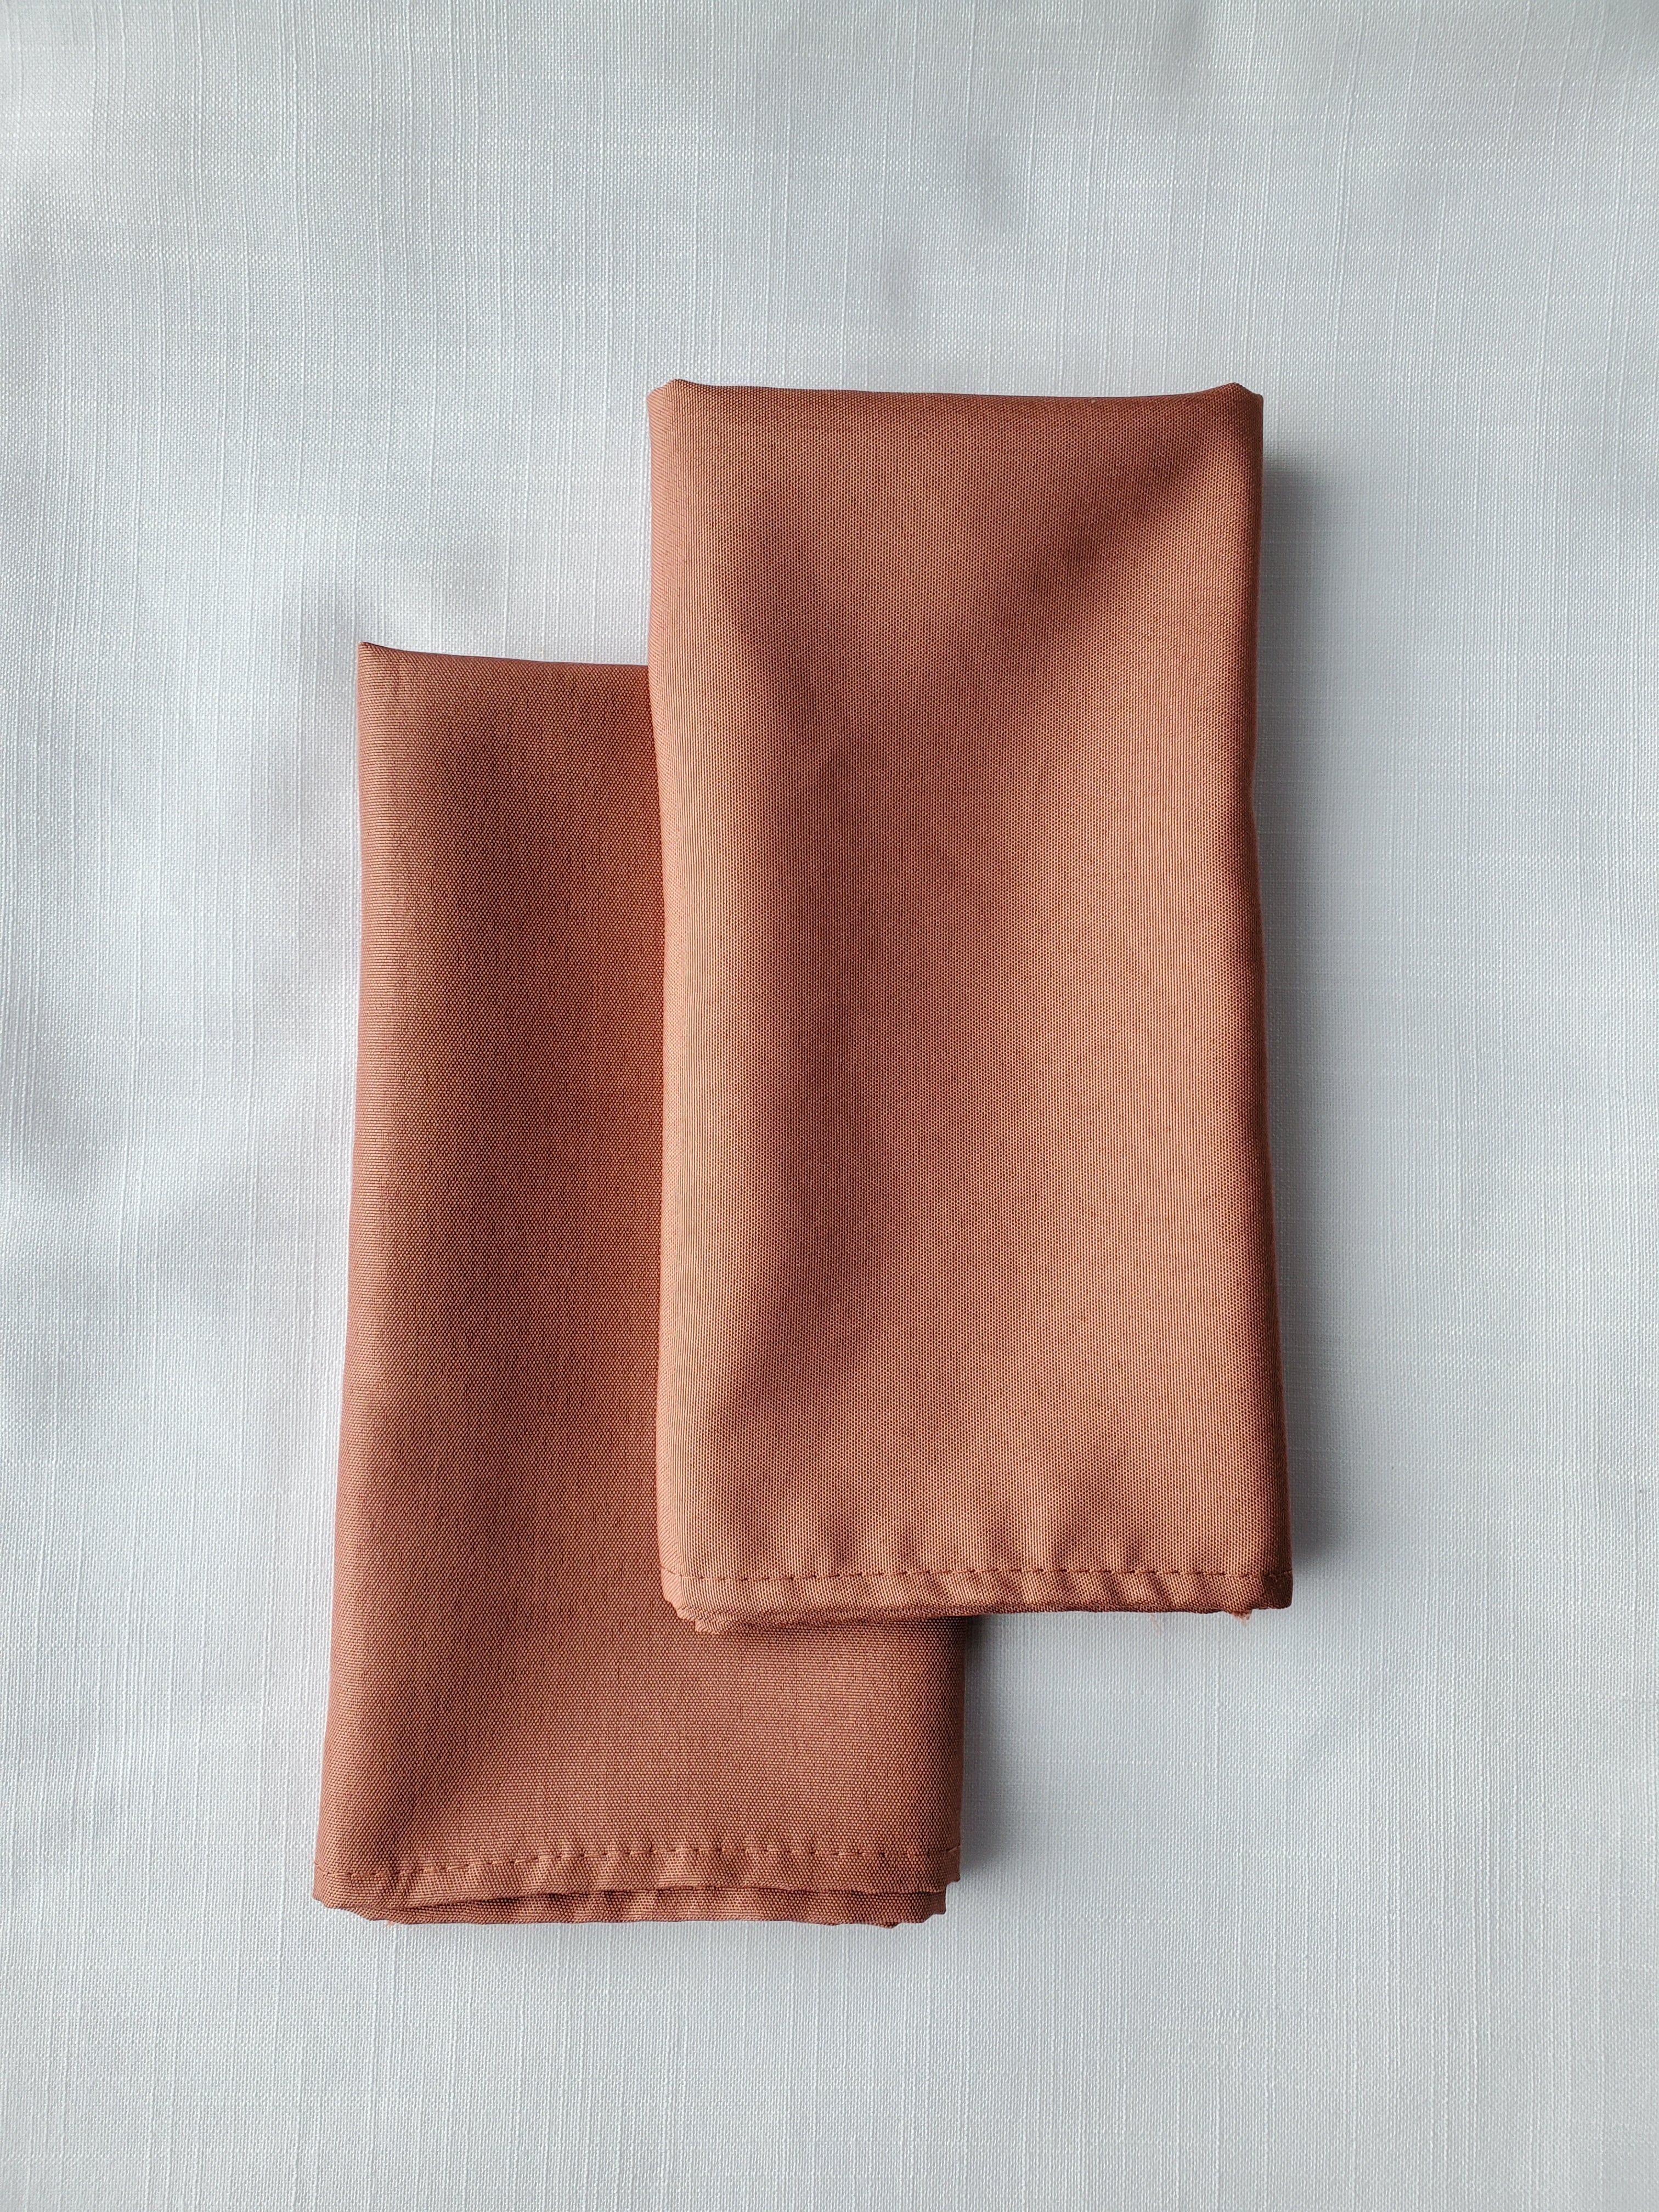 Terracotta Napkin Set For home table settings and home decor or dinner party